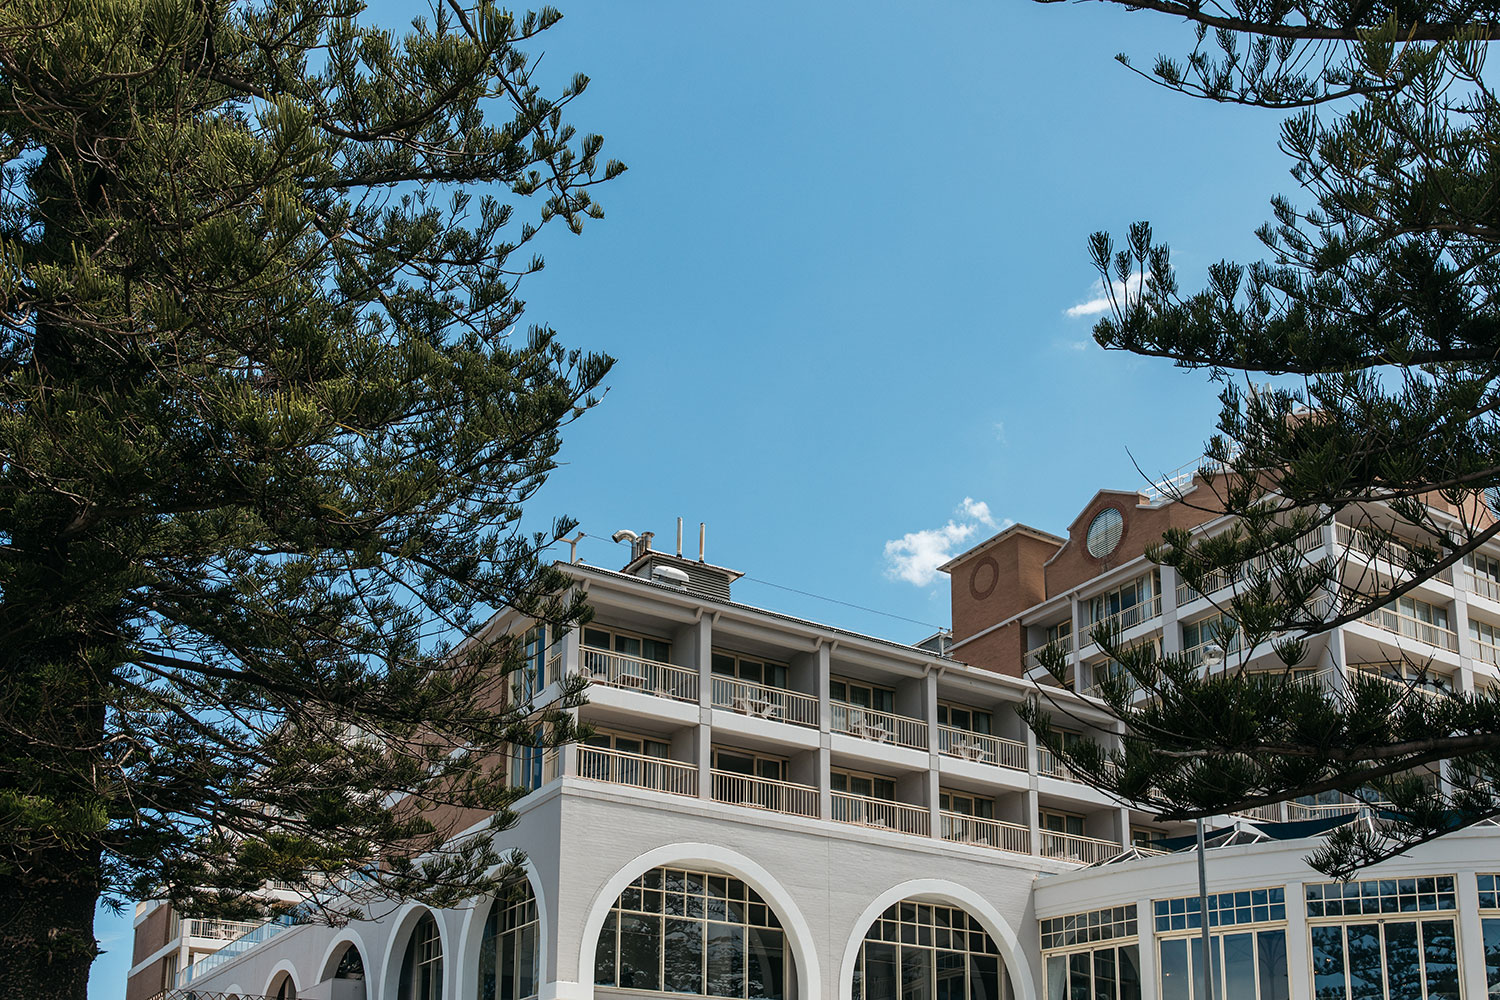 Crowne Plaza Terrigal Pacific